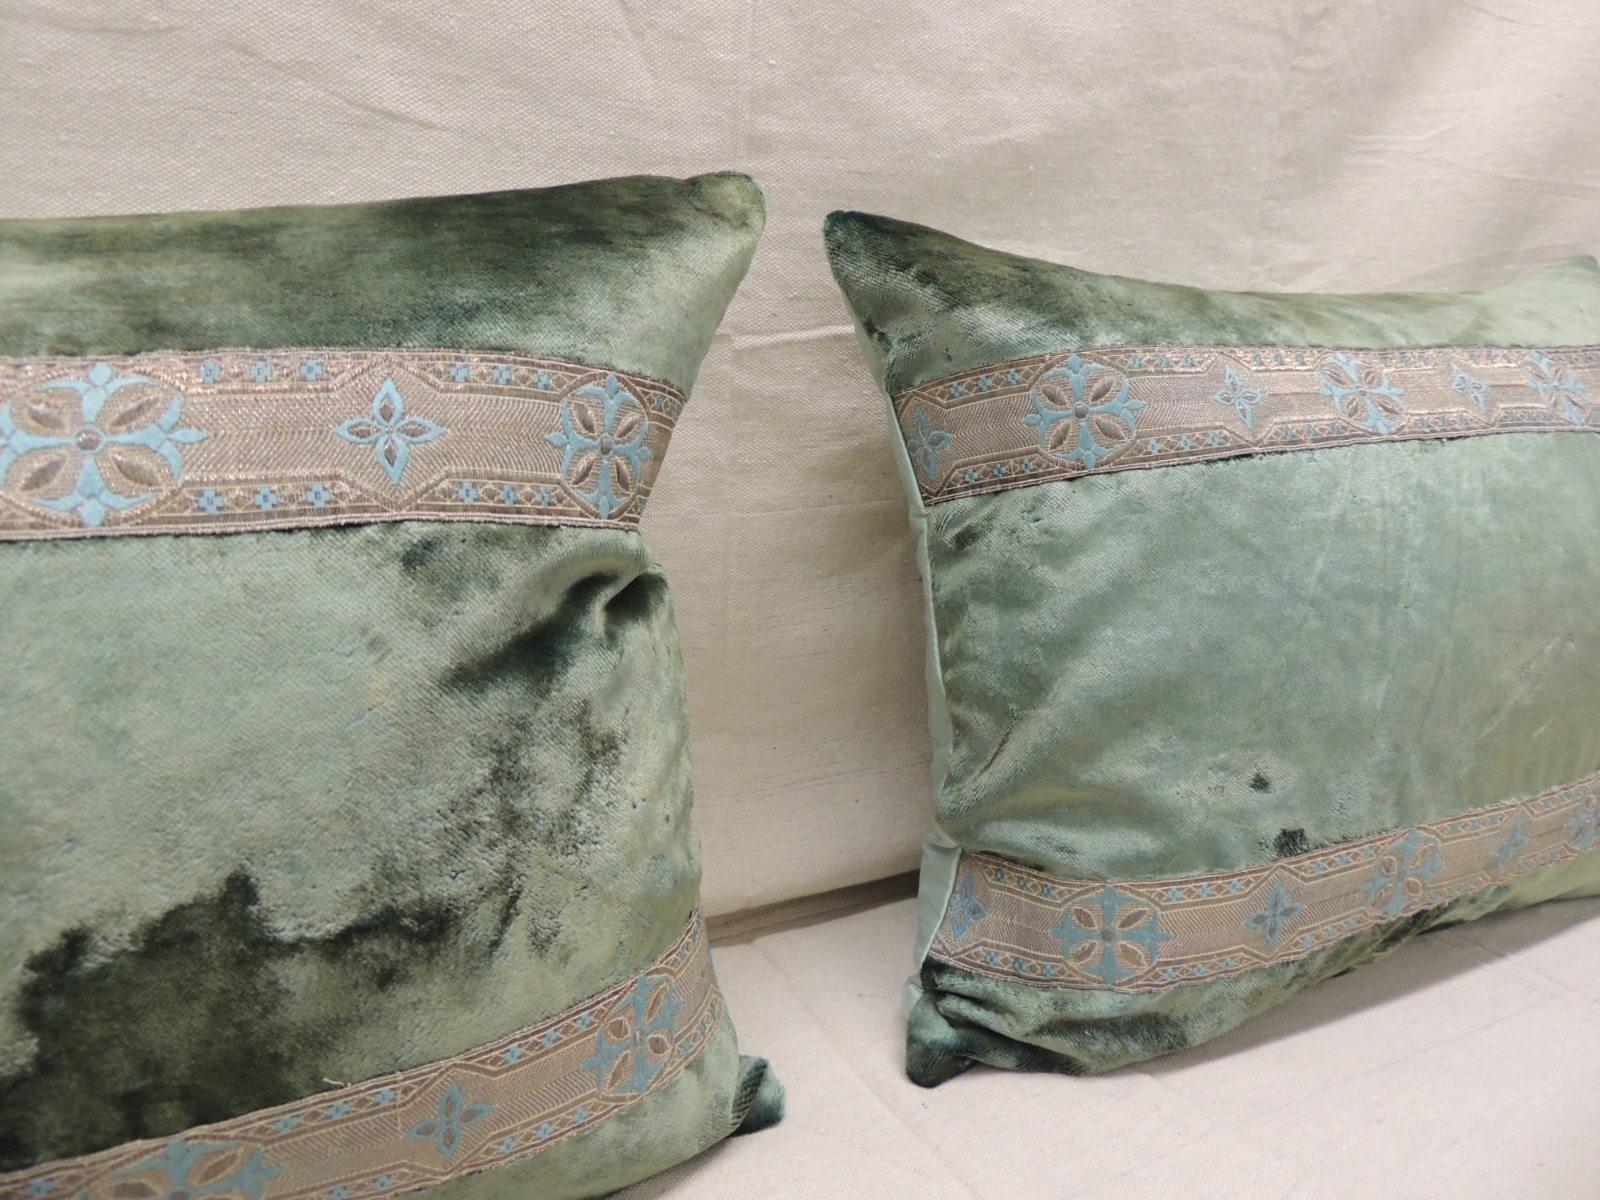 Pair of antique crushed velvet green and silver bolsters decorative pillows
with 19th century metallic trims and aqua color silk backings.
Decorative pillow handcrafted and designed in the USA.
Closure by stitch (no zipper closure) with